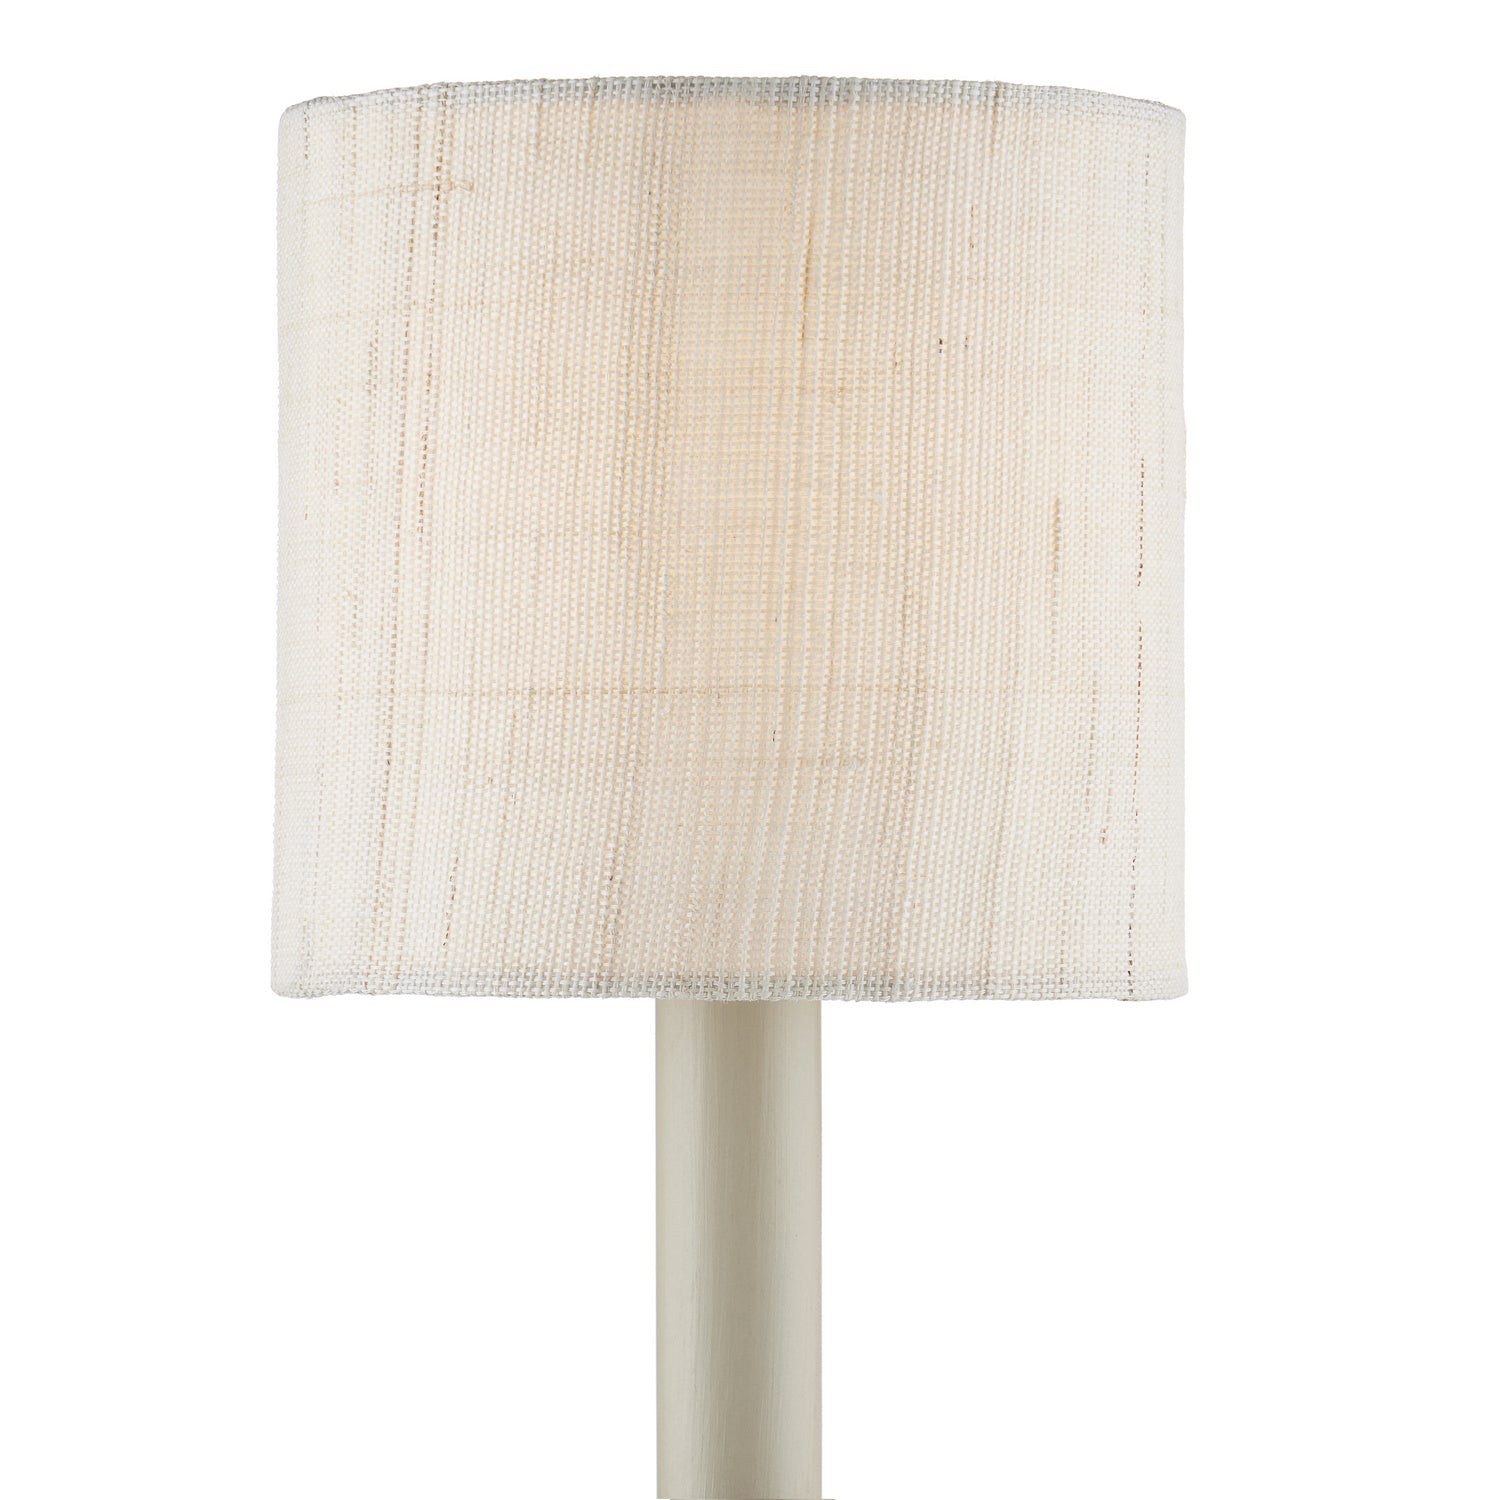 Chandelier Shade in Light Natural finish